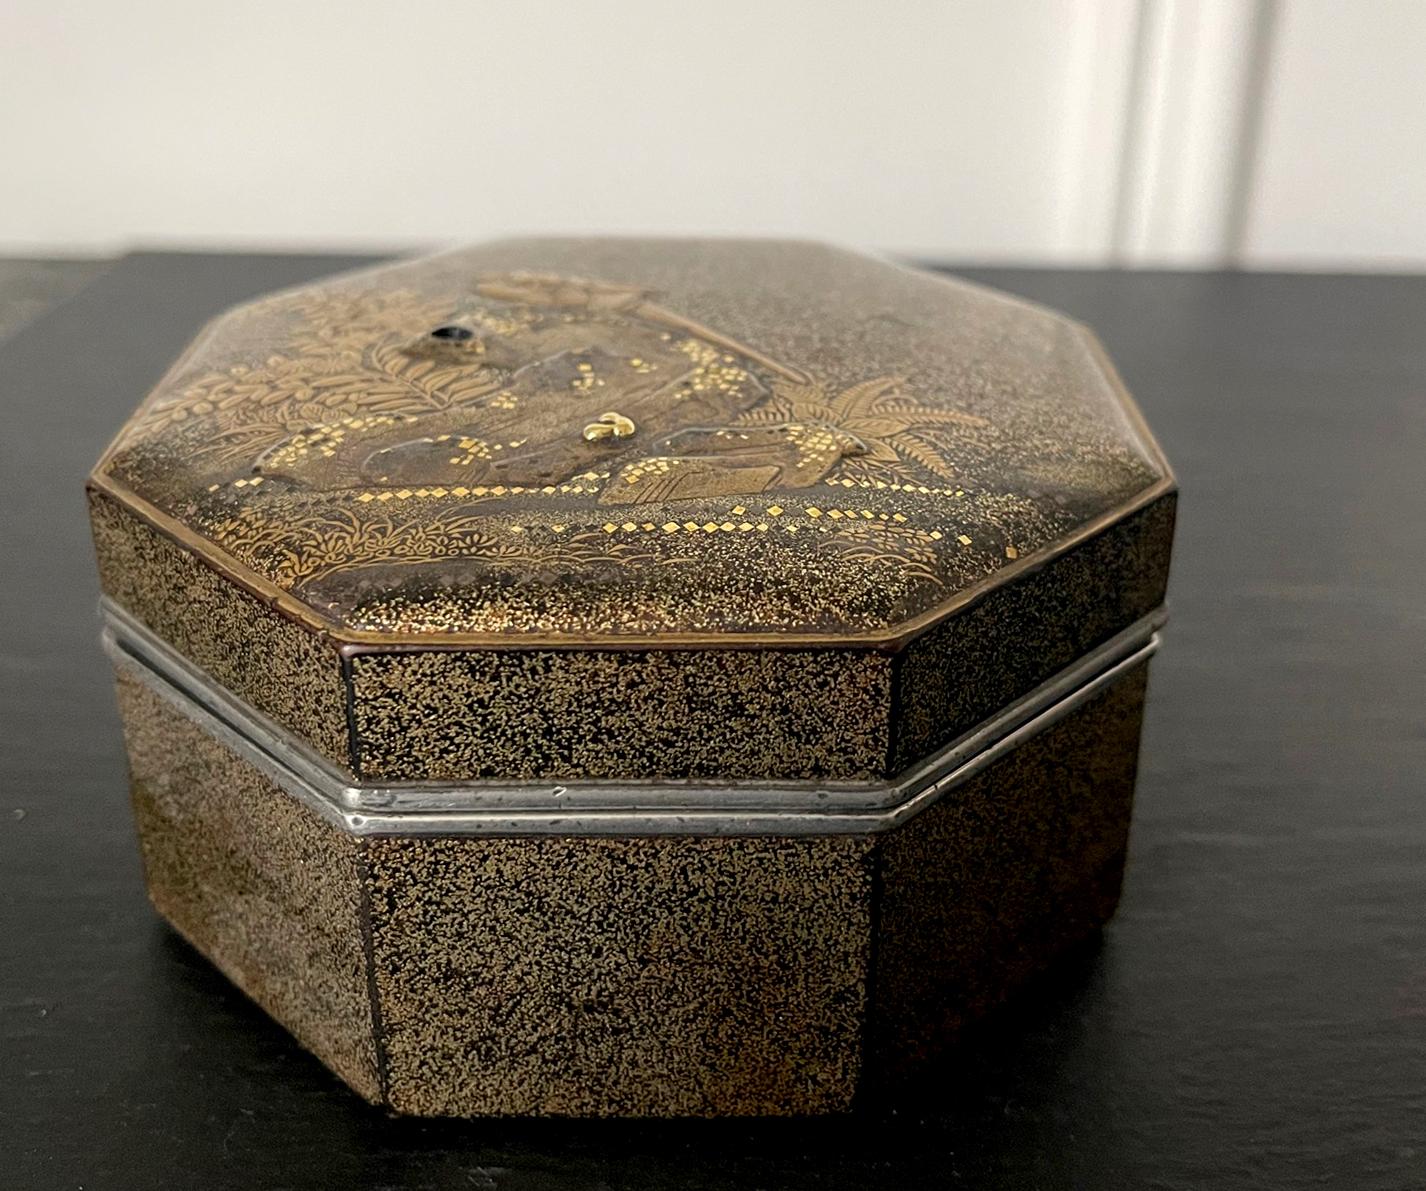 Exquisite Early Japanese Lacquer Kobako Box with Insert Tray 1